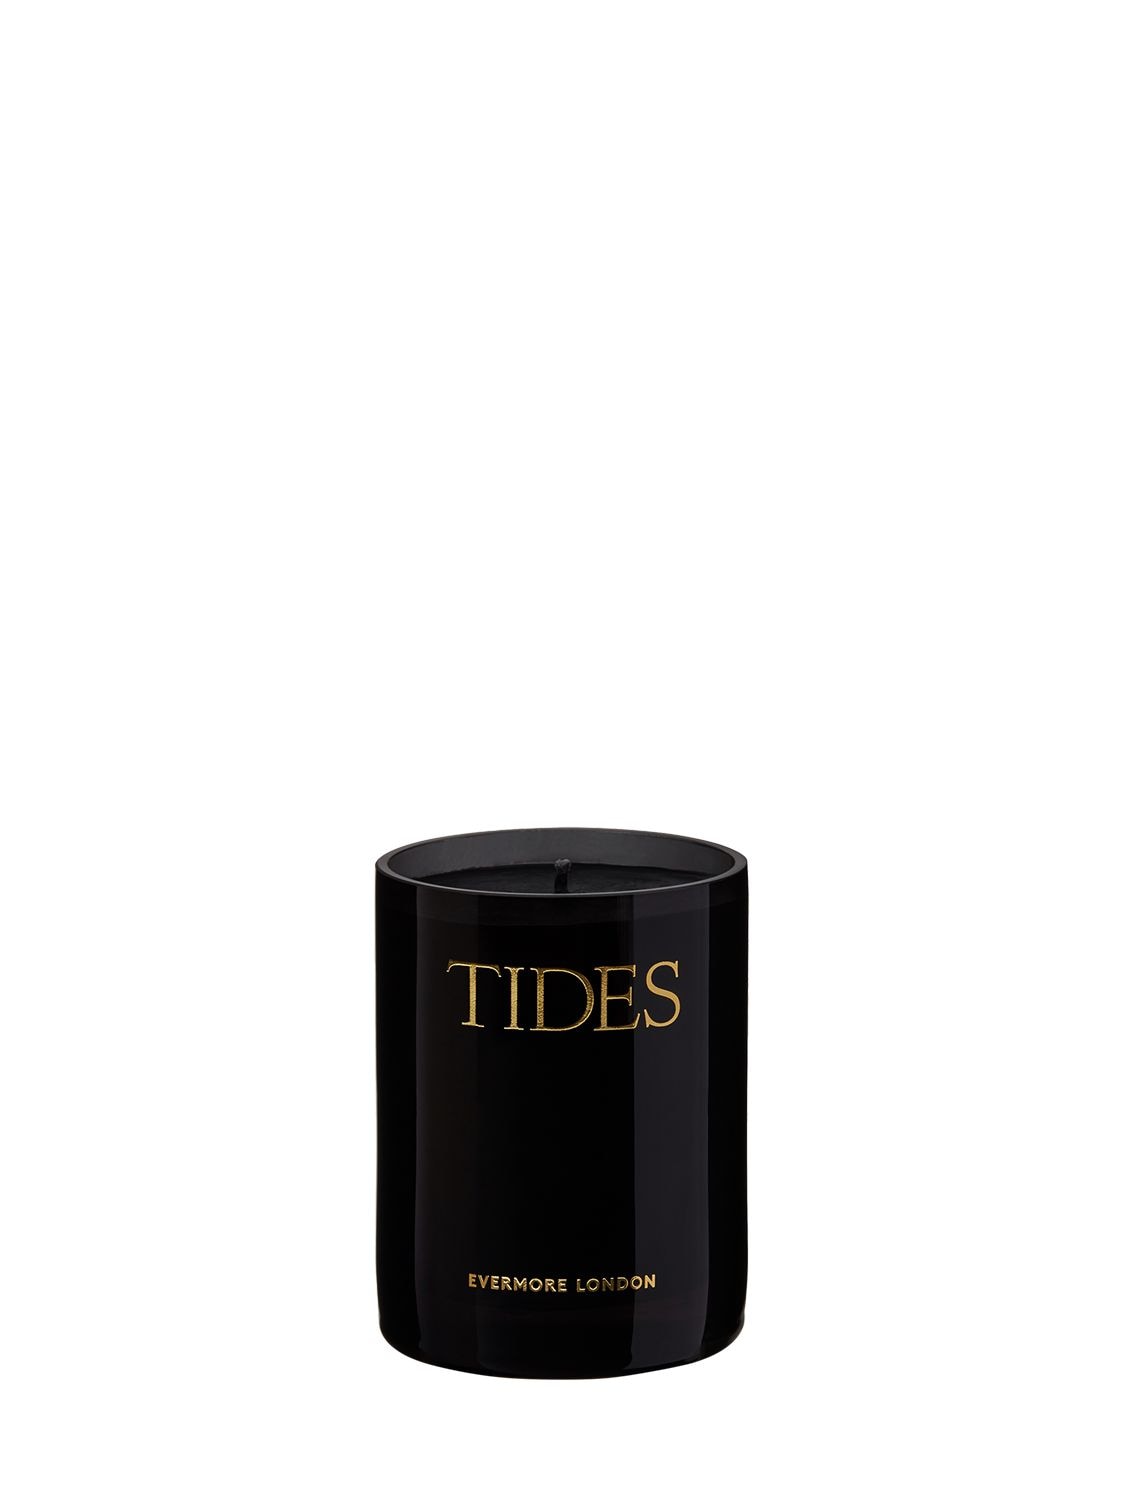 Evermore 300g Tides Scented Candle In Black